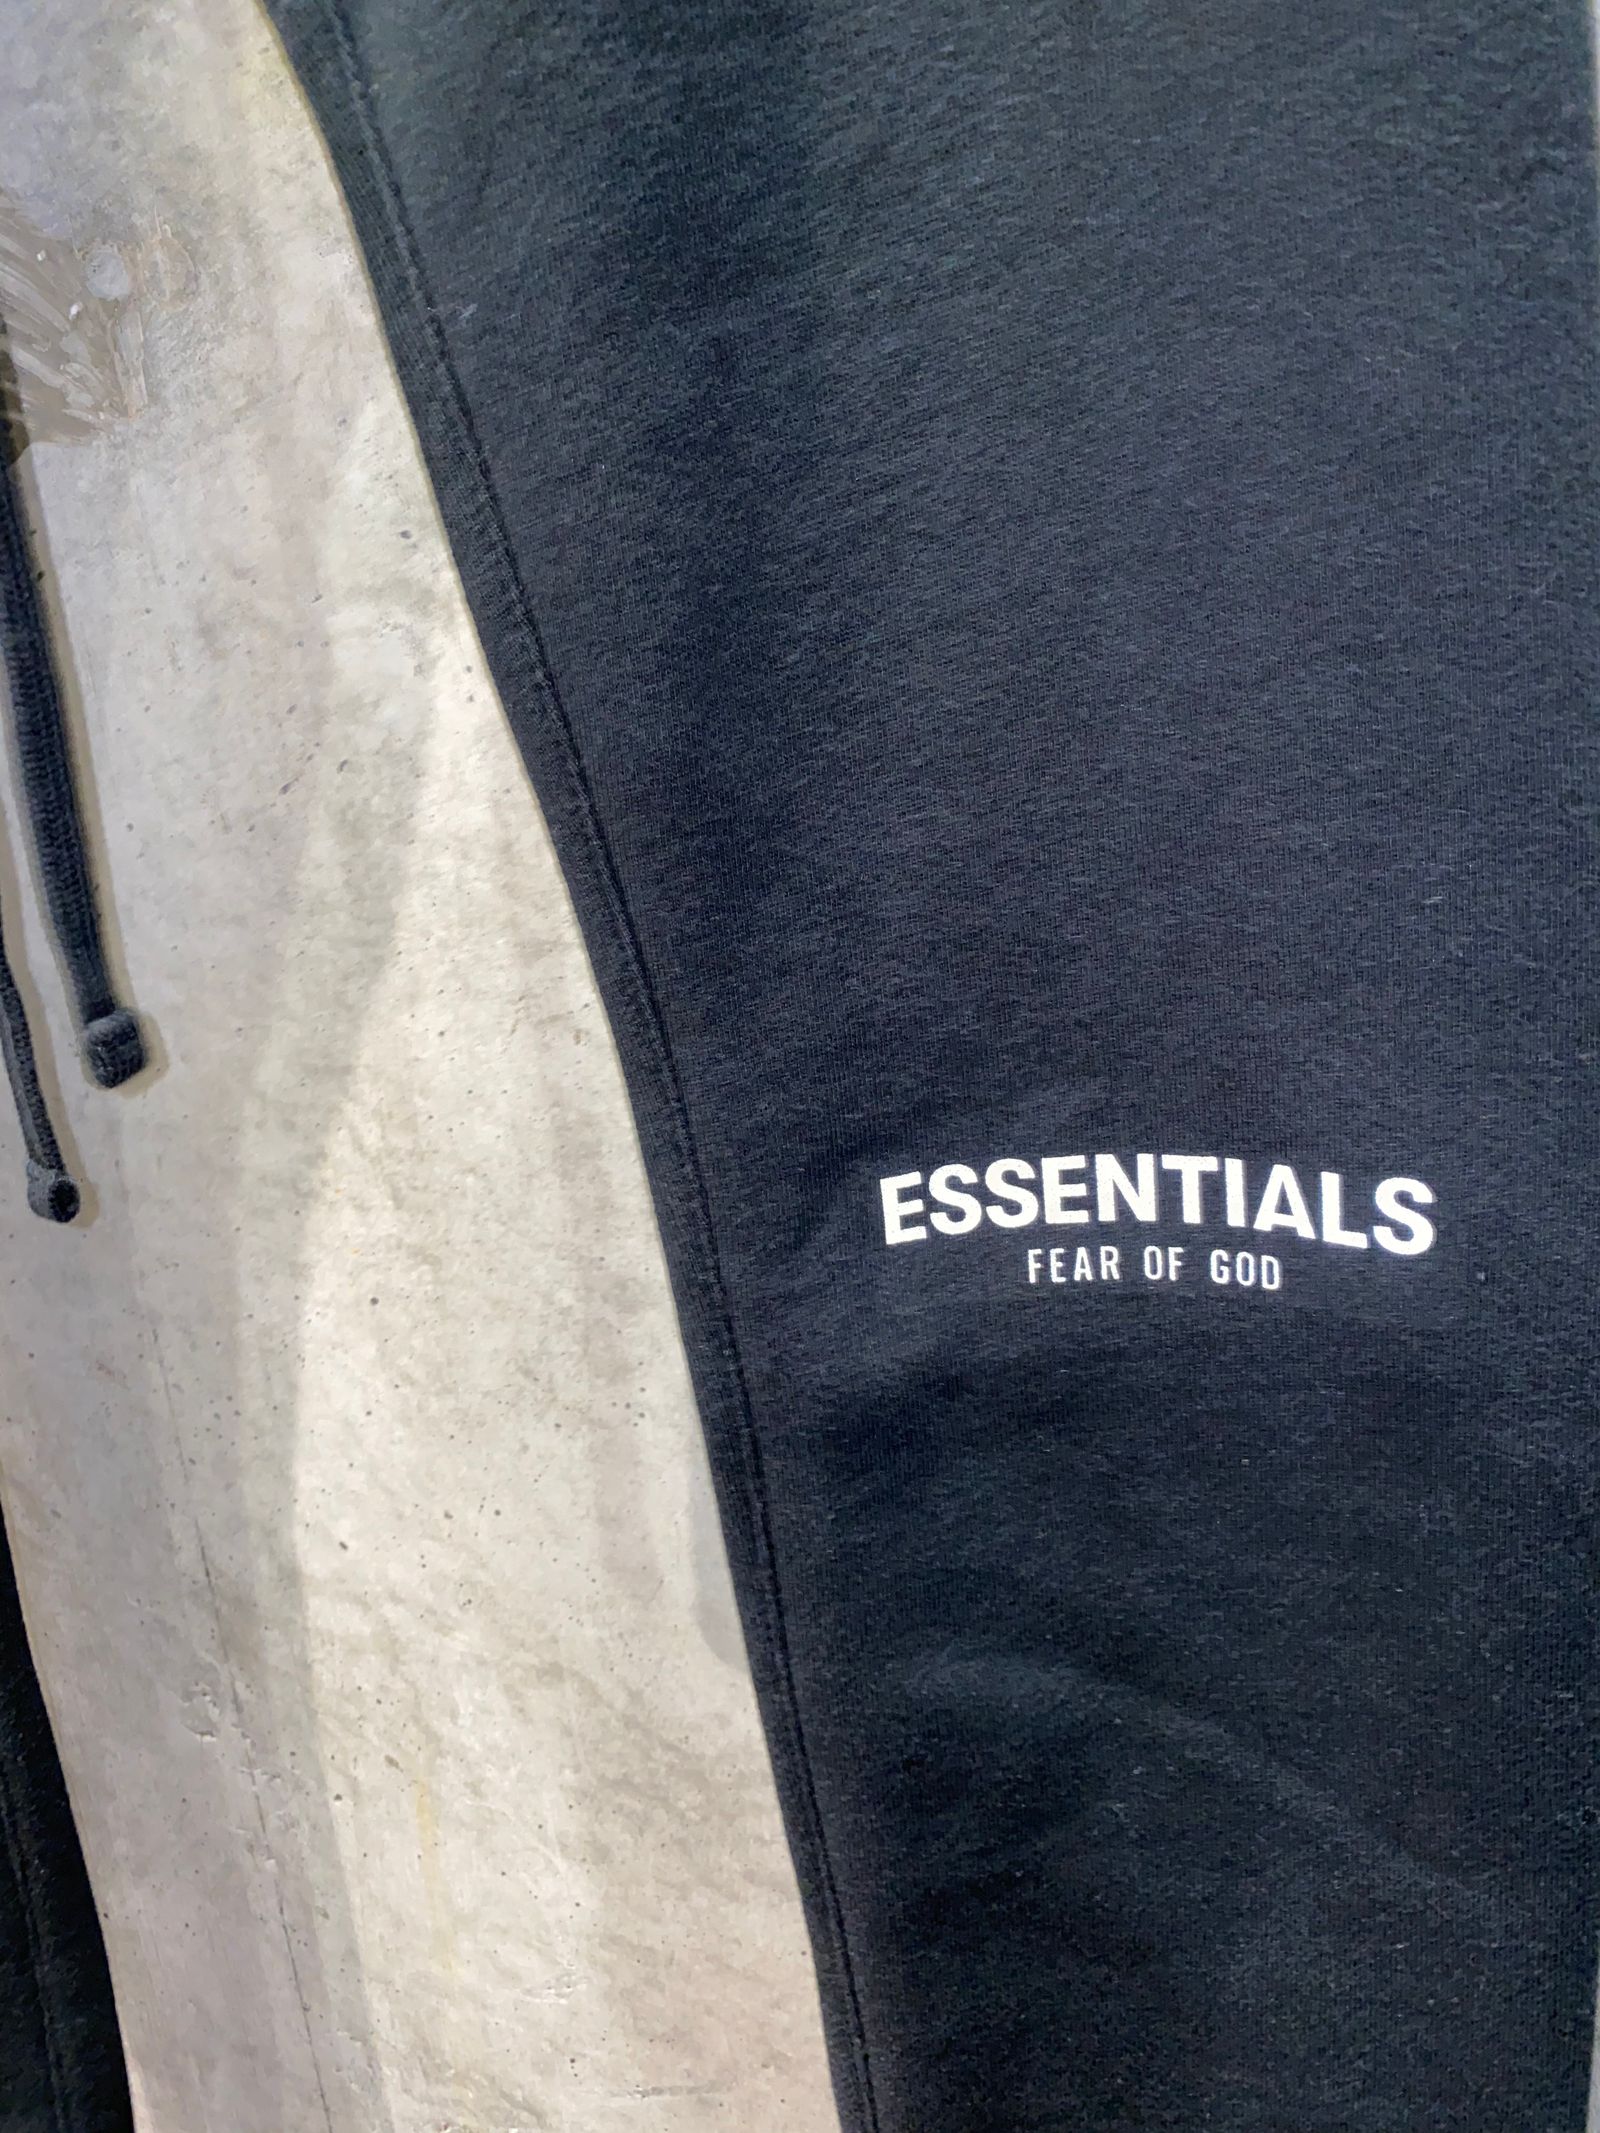 FOG ESSENTIALS - FOG ESSENTIALS SWEAT PANTS/BLACK | R and another ...